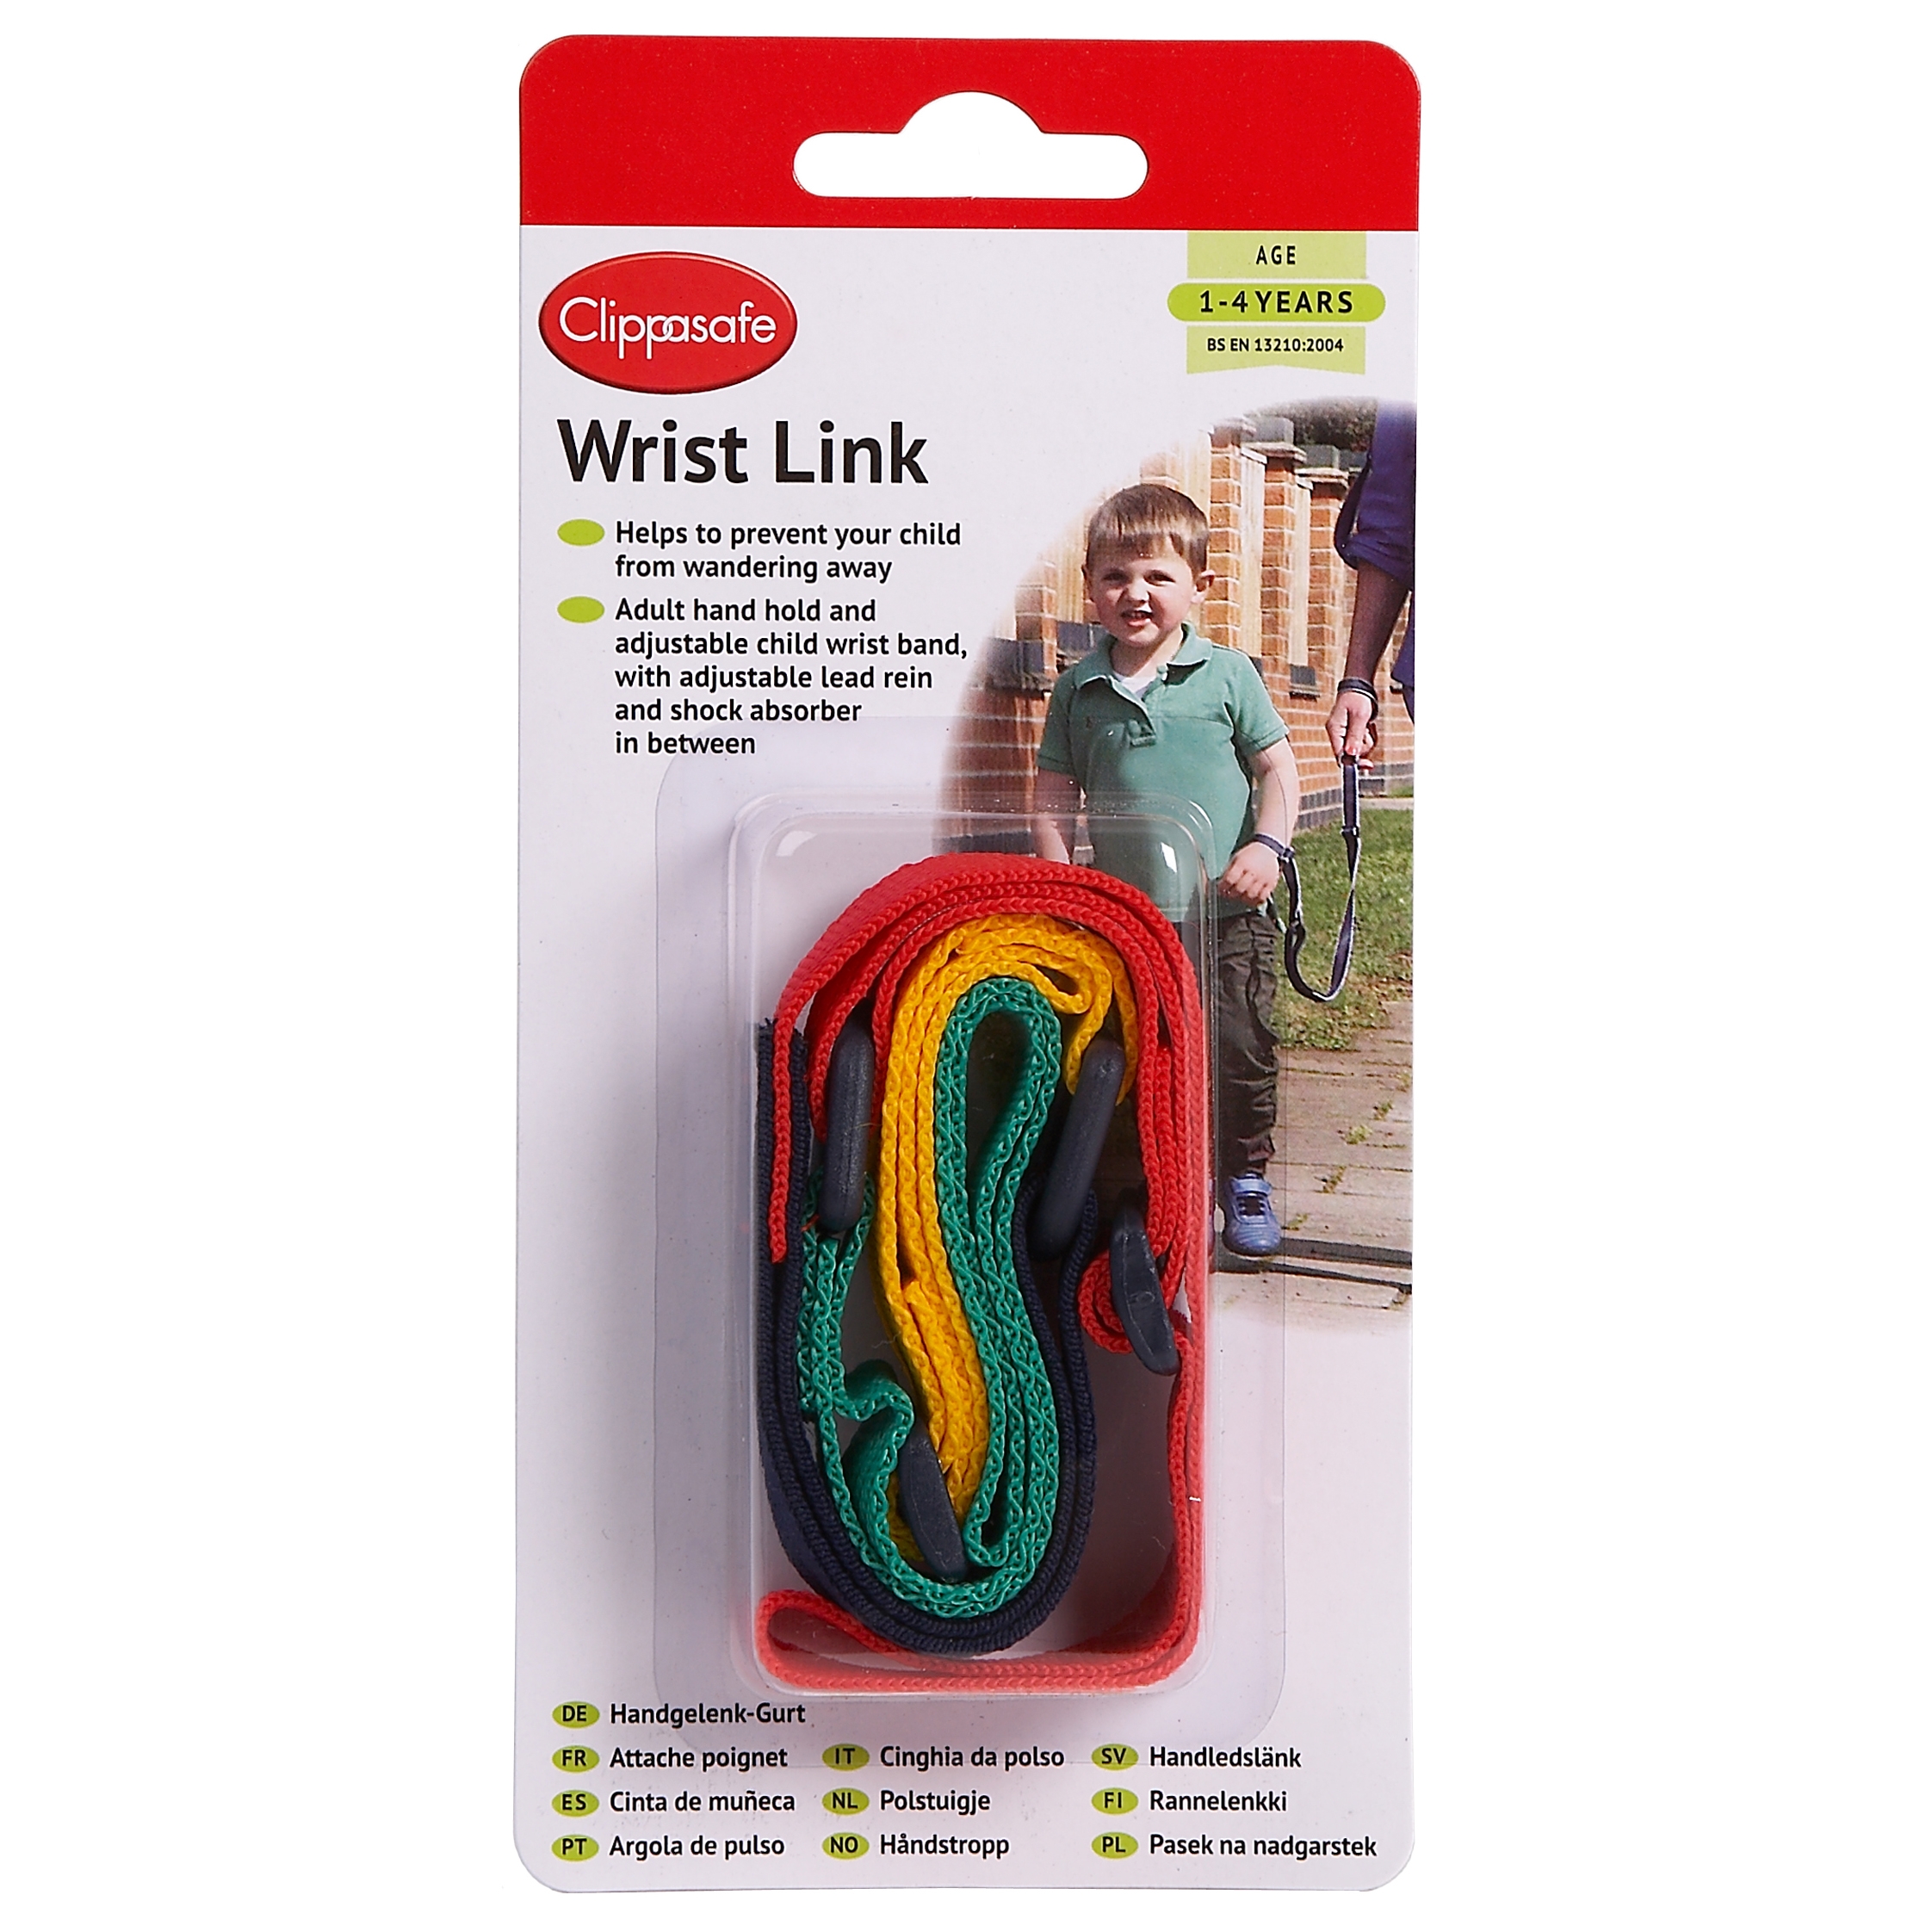 CLIPPASAFE WRIST LINK MULTI-COLOURED AGE 1-4 YEARS 